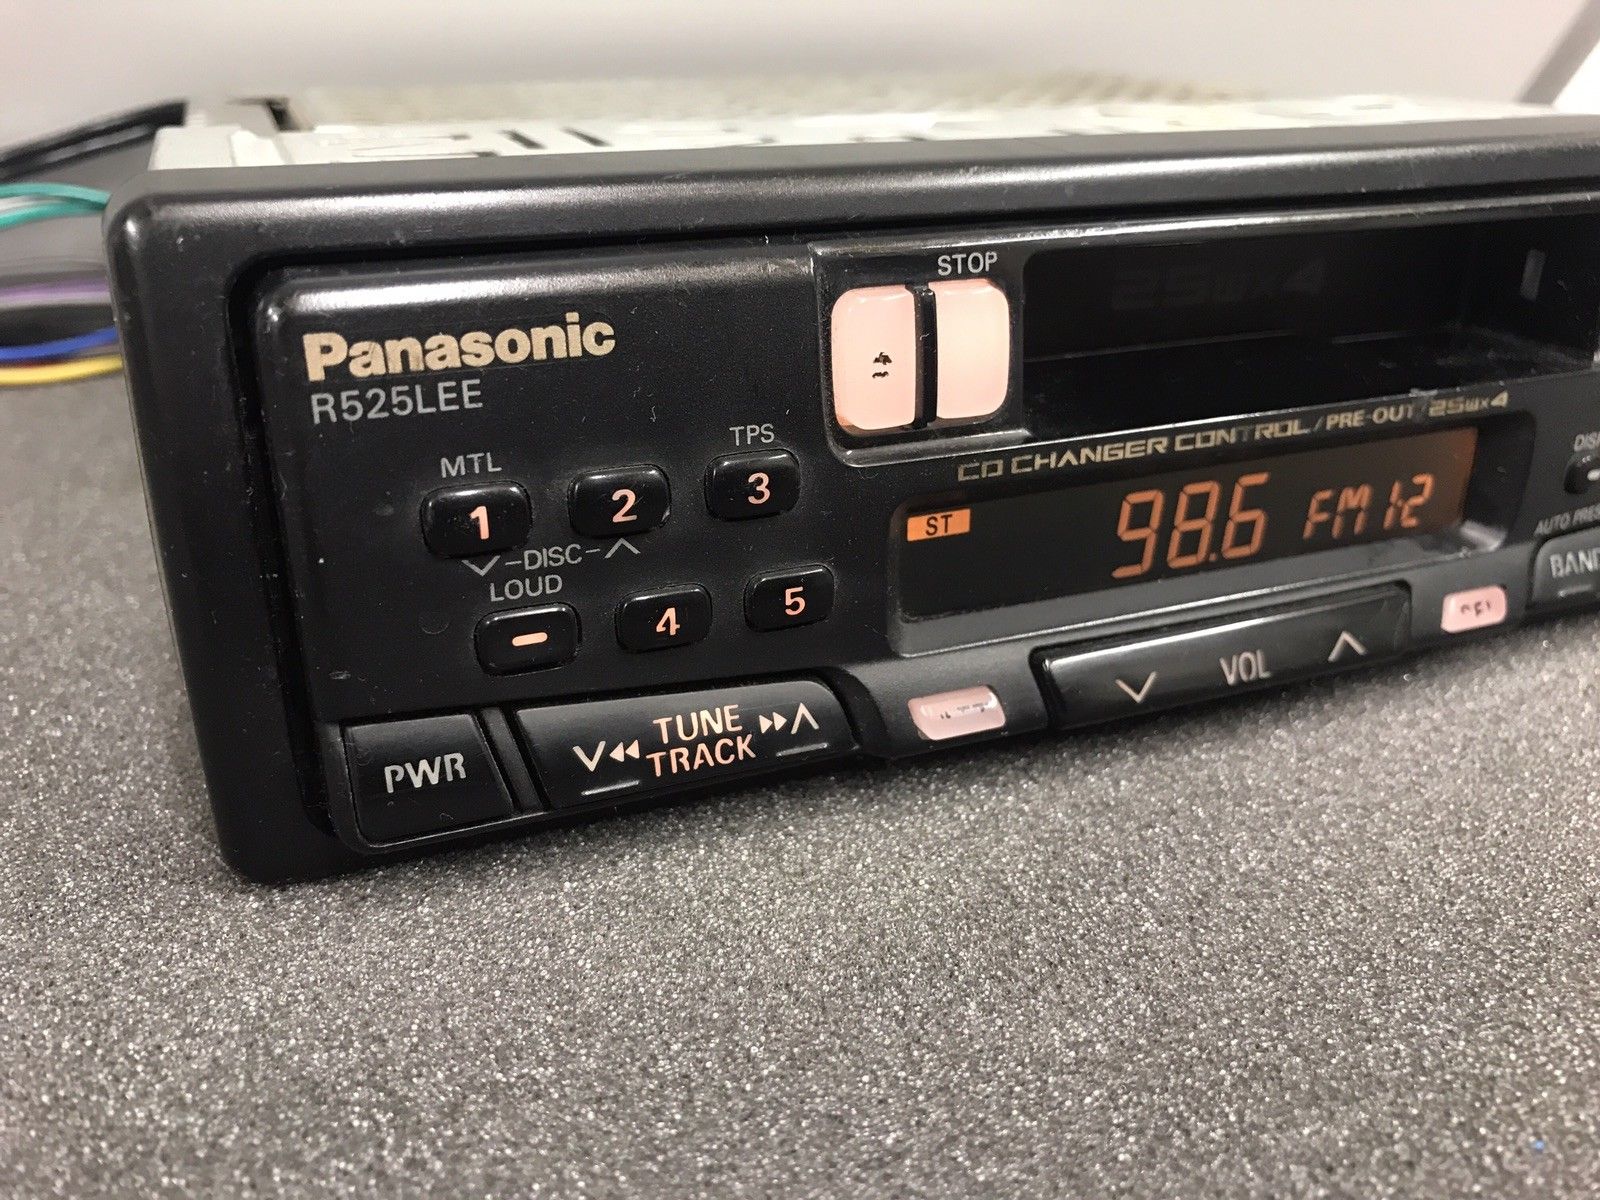 Panasonic R525Lee Old Vintage Radio Cassette Player Cd Changer Control Aux In